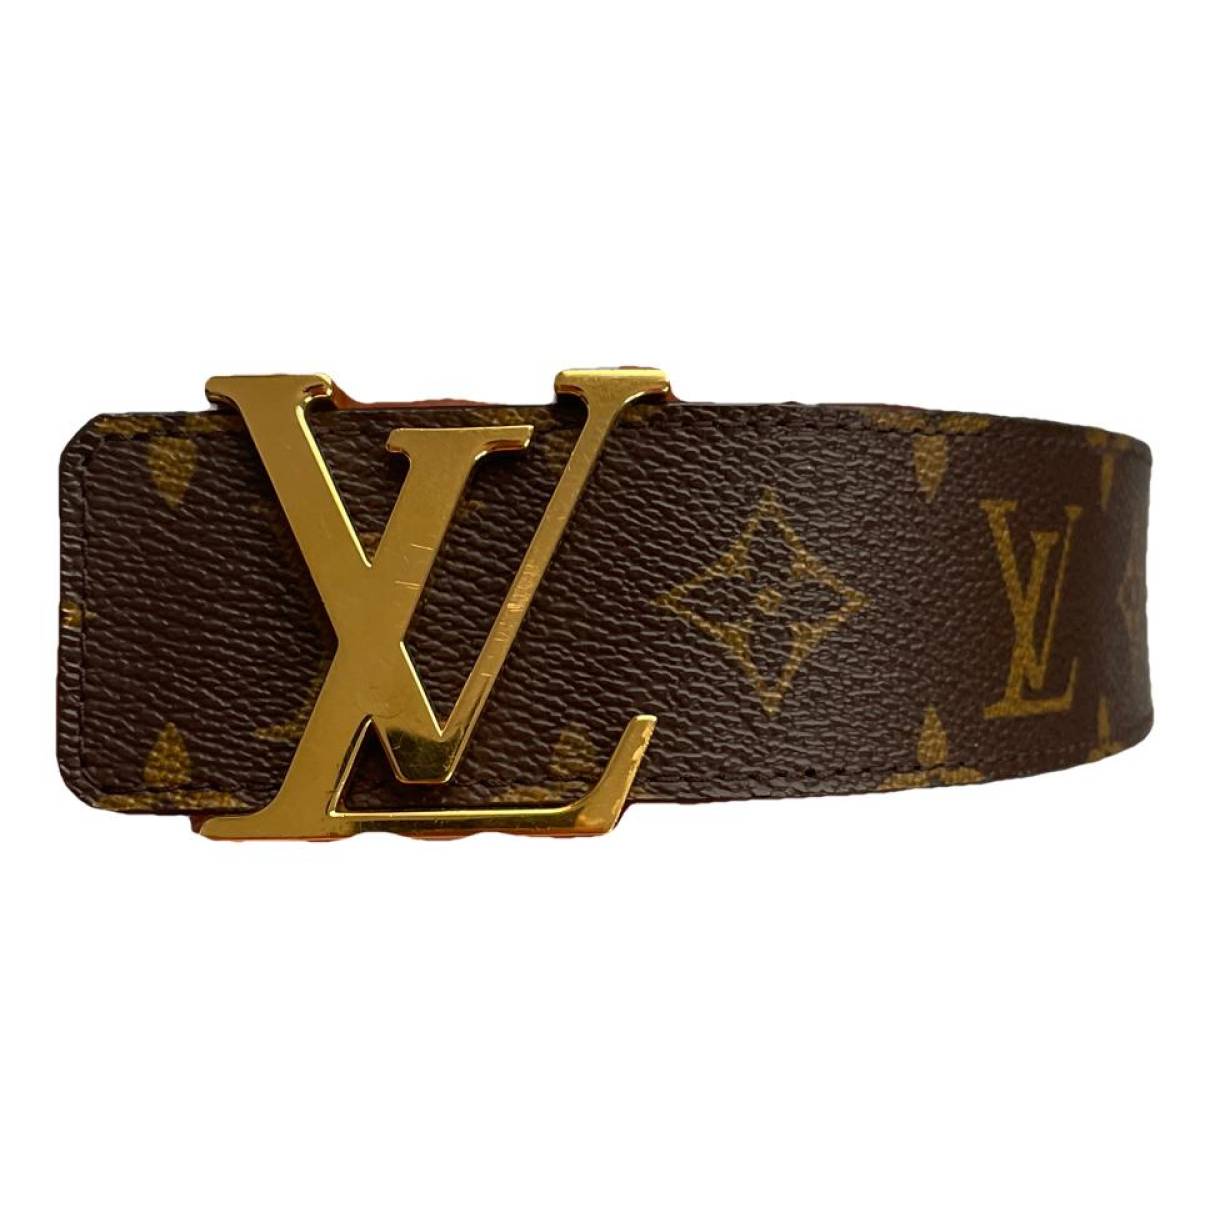 Initiales patent leather belt Louis Vuitton Gold size 80 cm in Patent  leather - 38054690